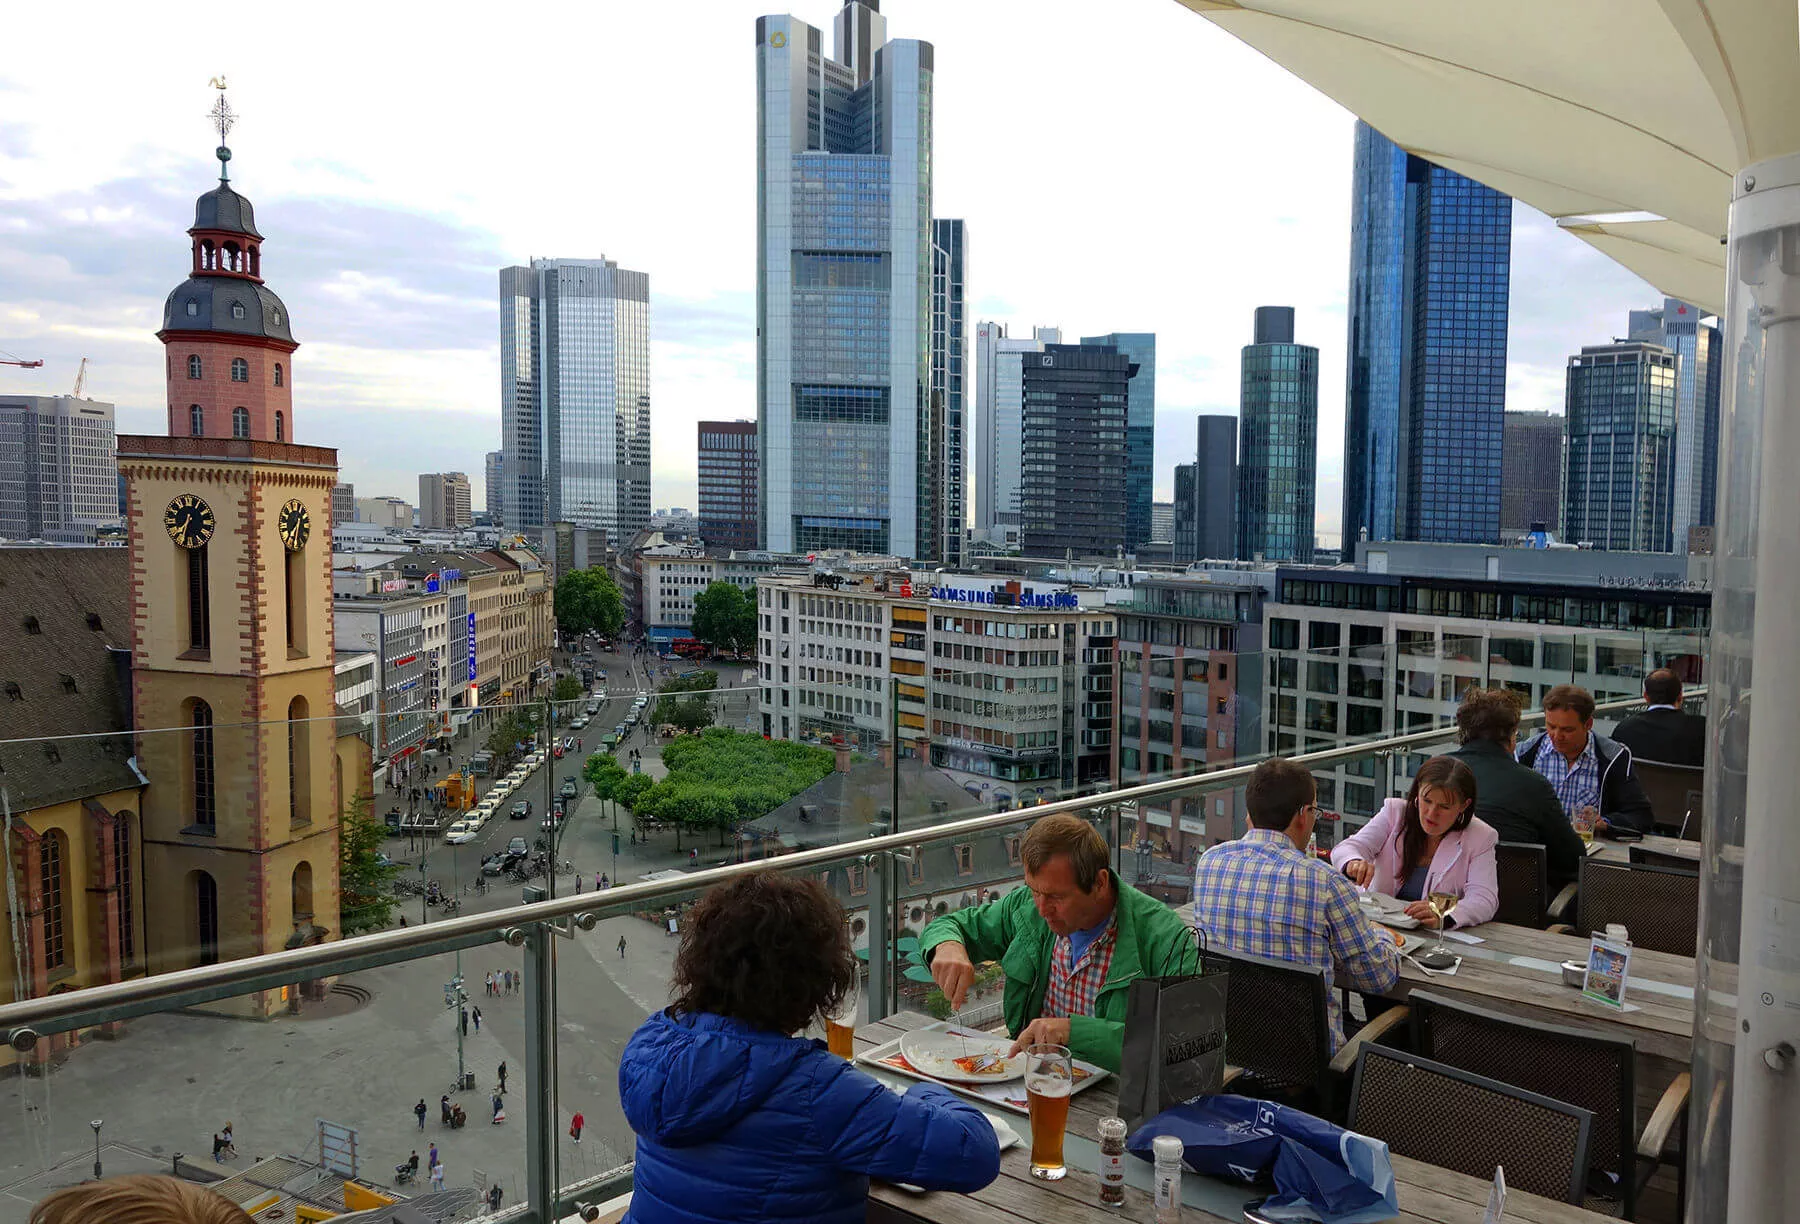 All over Europe, towering department stores offer great cafeteria lunches with rooftop views for no extra charge — like this one from Frankfurt’s Galeria Kaufhof